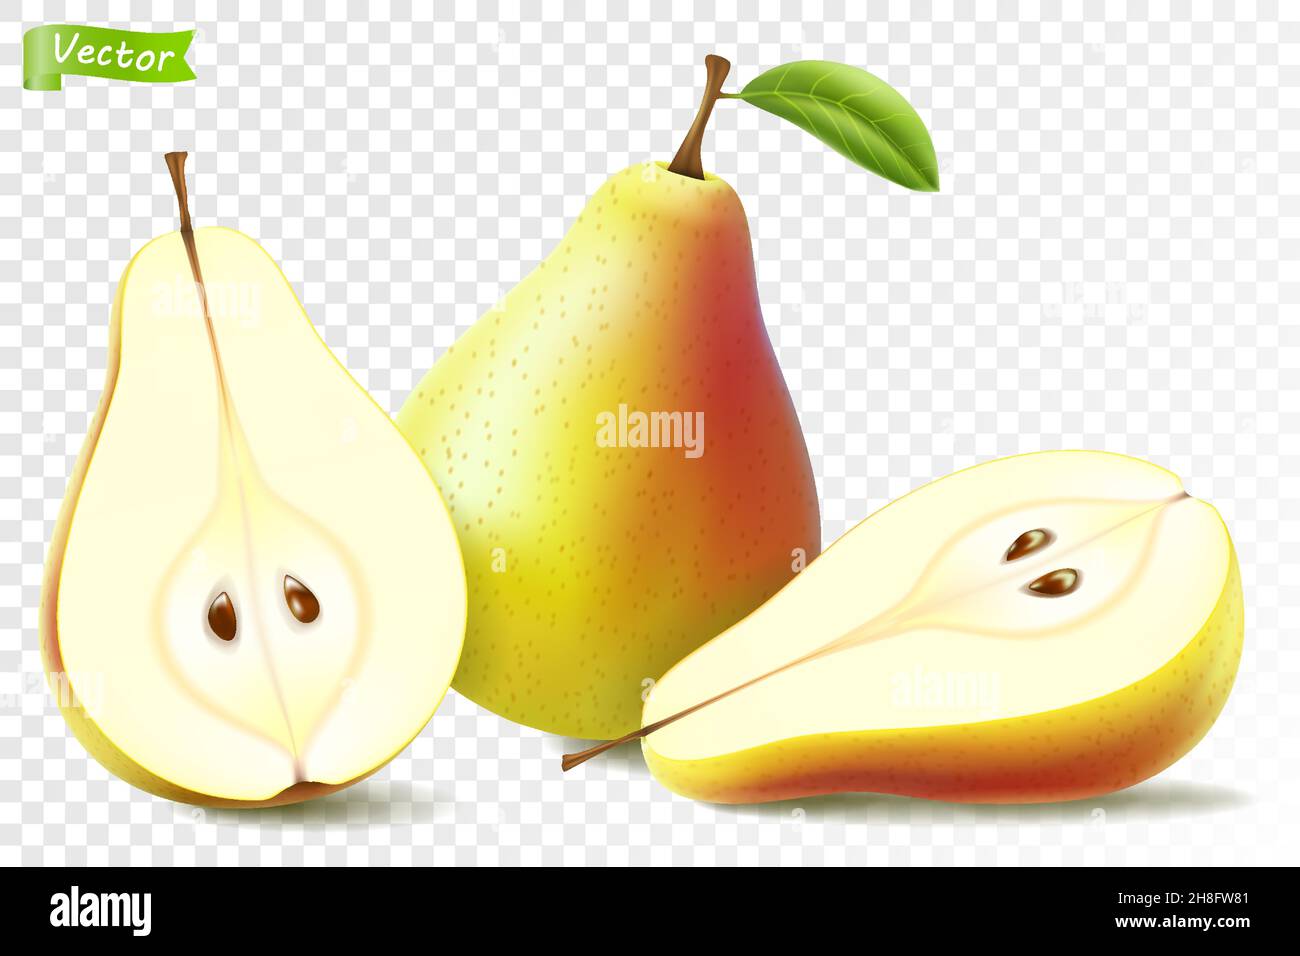 Pear whole and half for organic food Vector3d realistic, drink product design. Fresh sweet fruit full of vitamins for healthy eating, diet. Natural pr Stock Vector